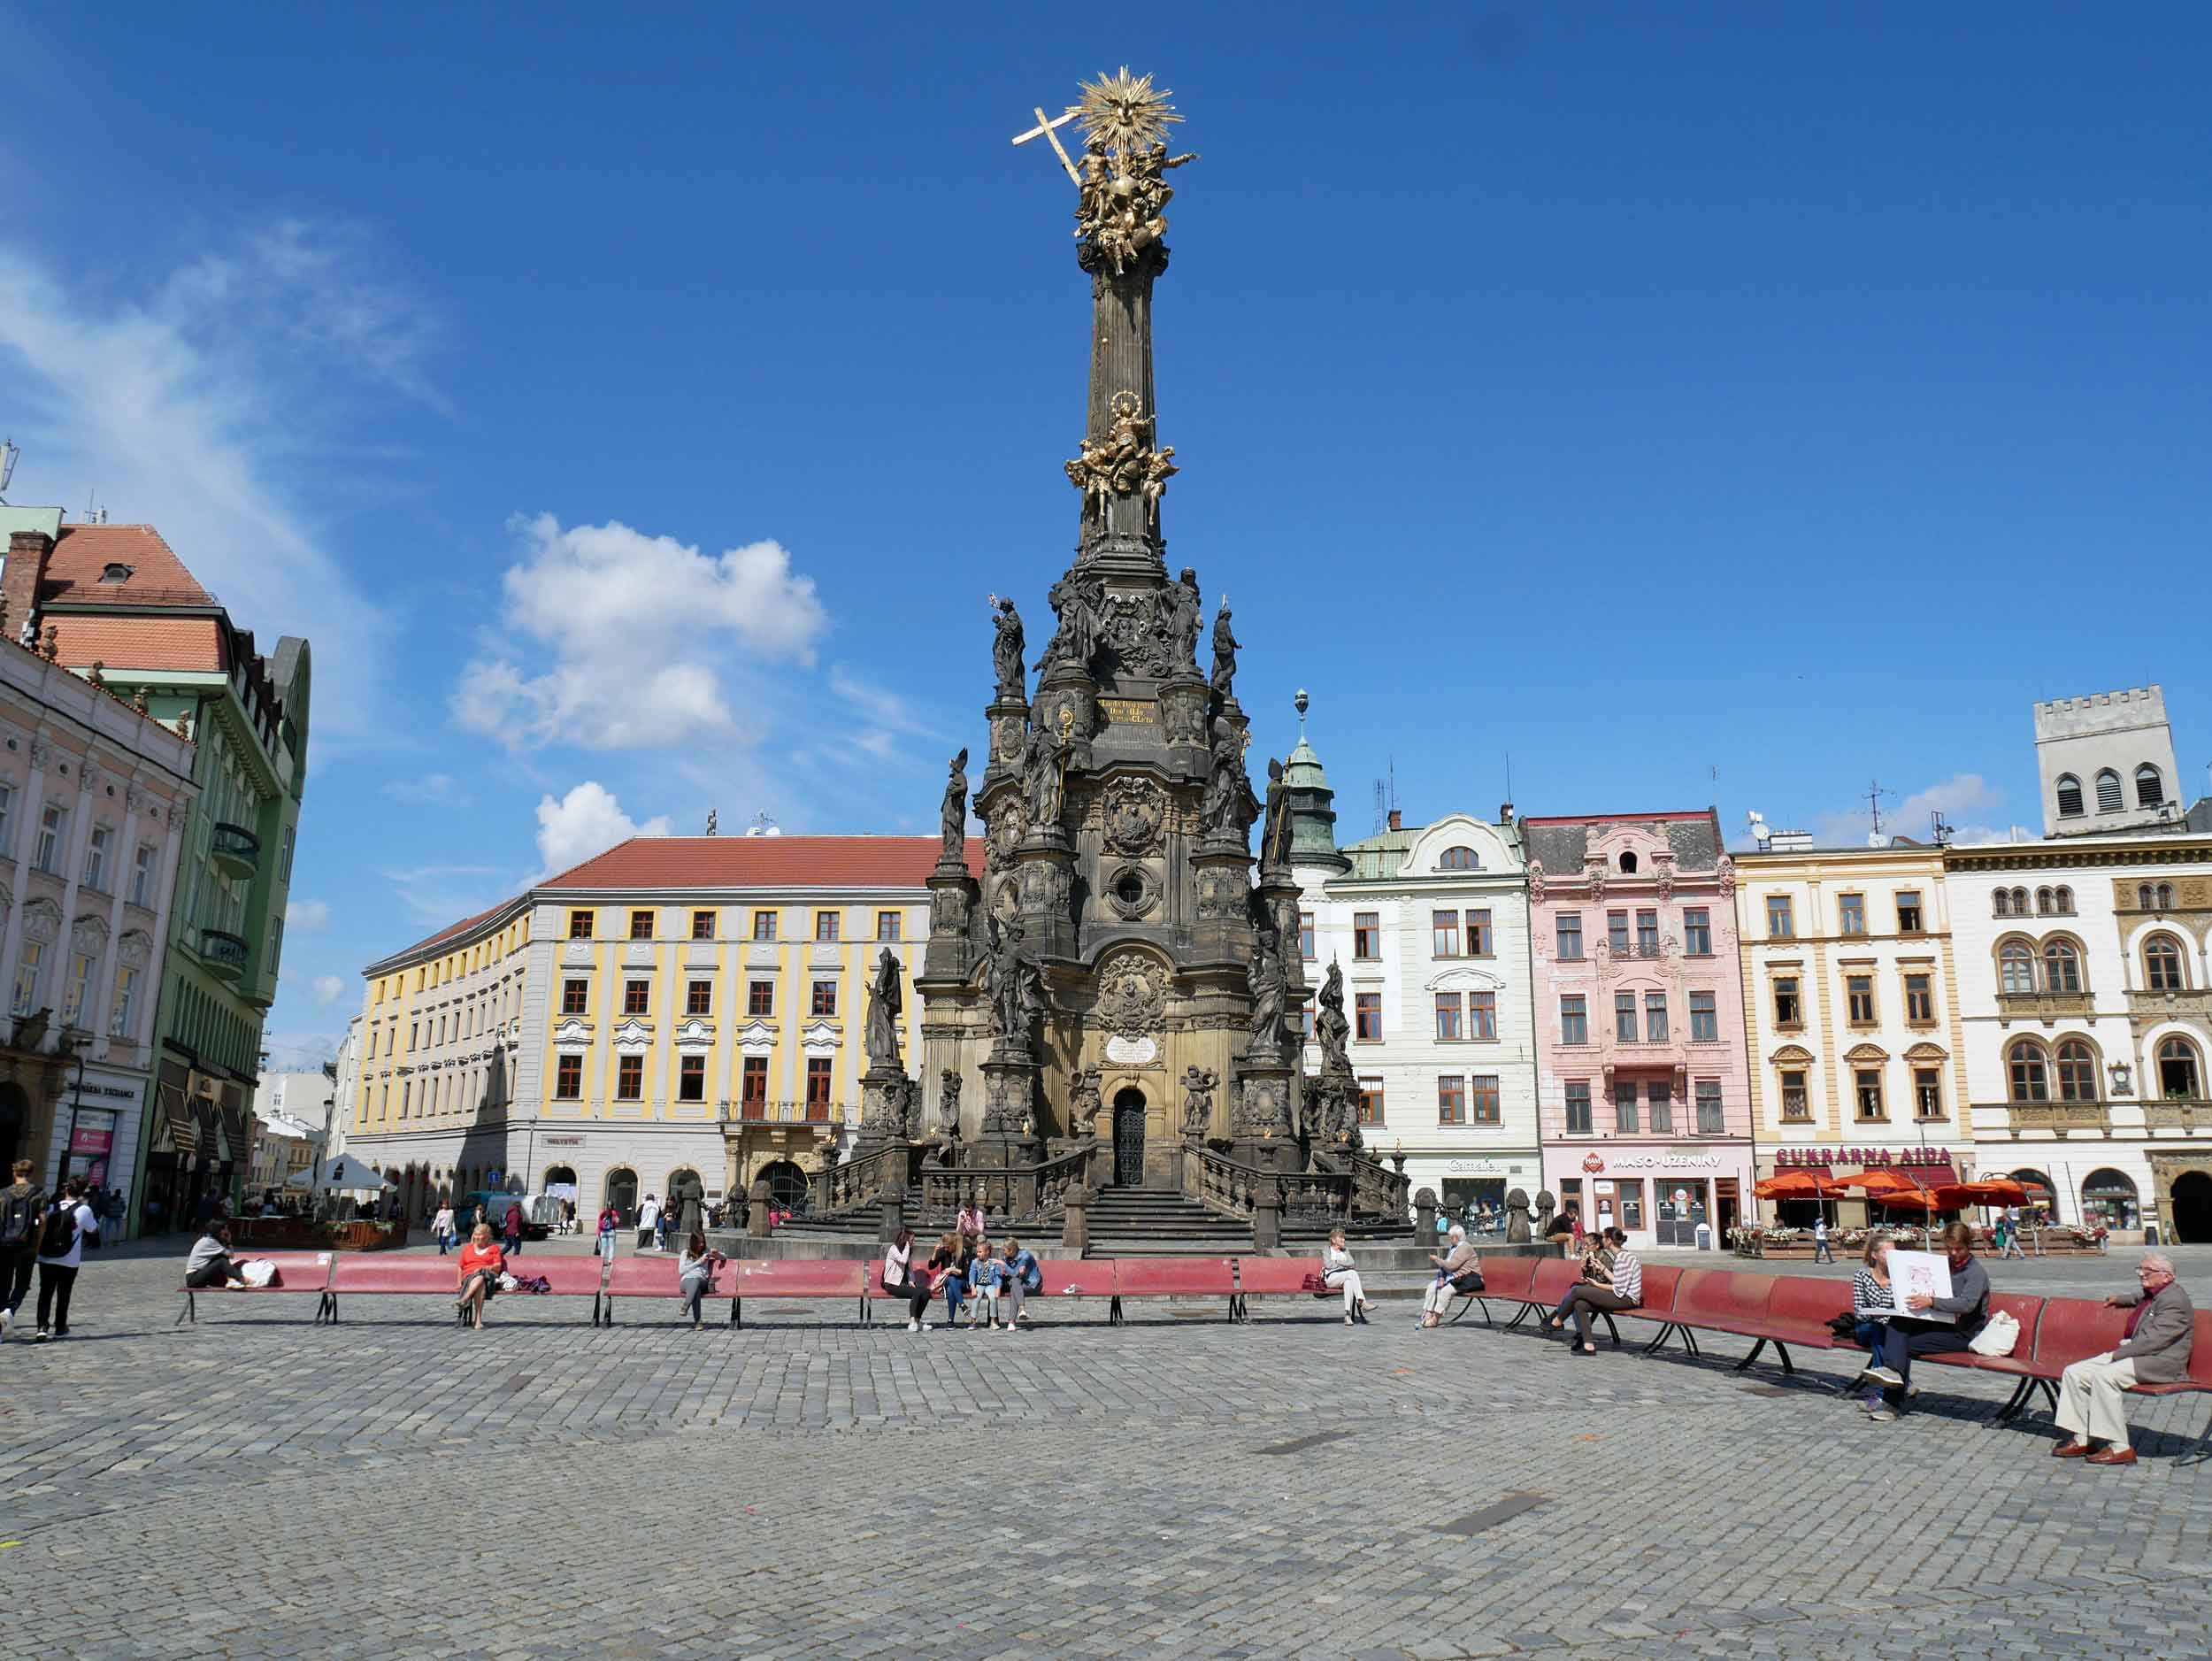  The Holy Trinity Column in Olomouc's main square is an 18th century Baroque monument built to celebrate the Catholic Church and the faith of the people.&nbsp; 